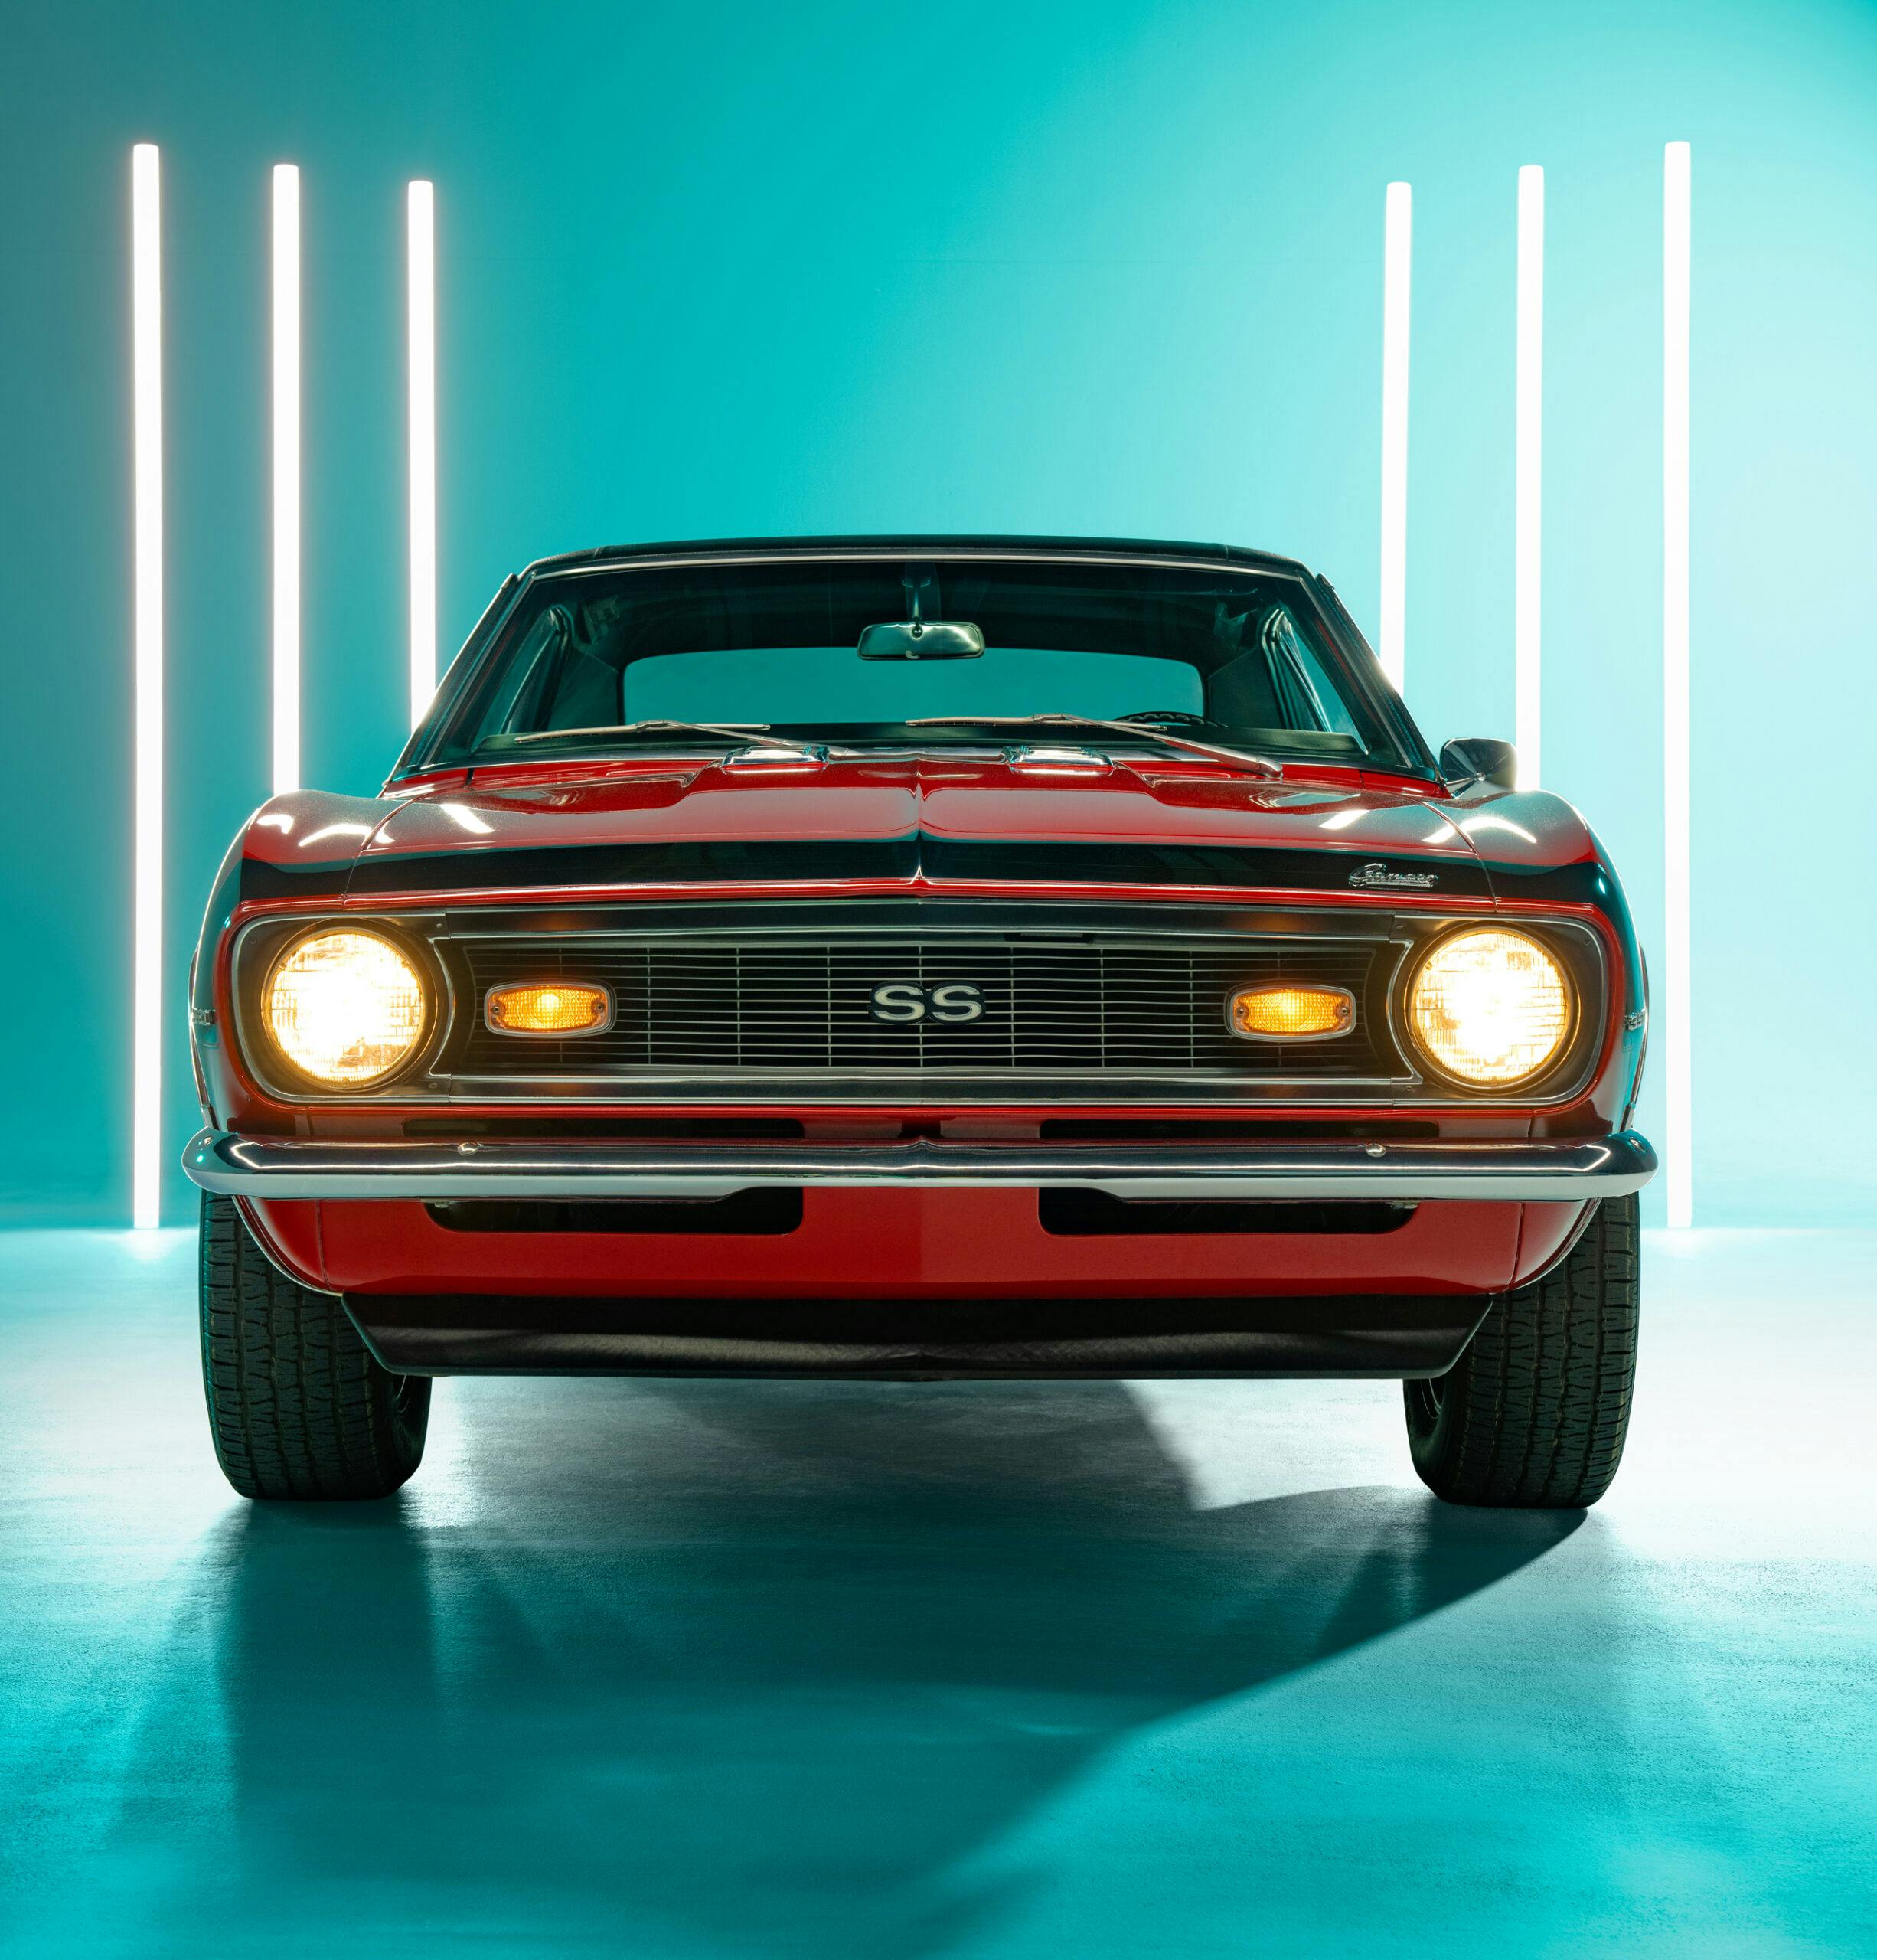 Differences Within a Generation: '67-'69 Camaro